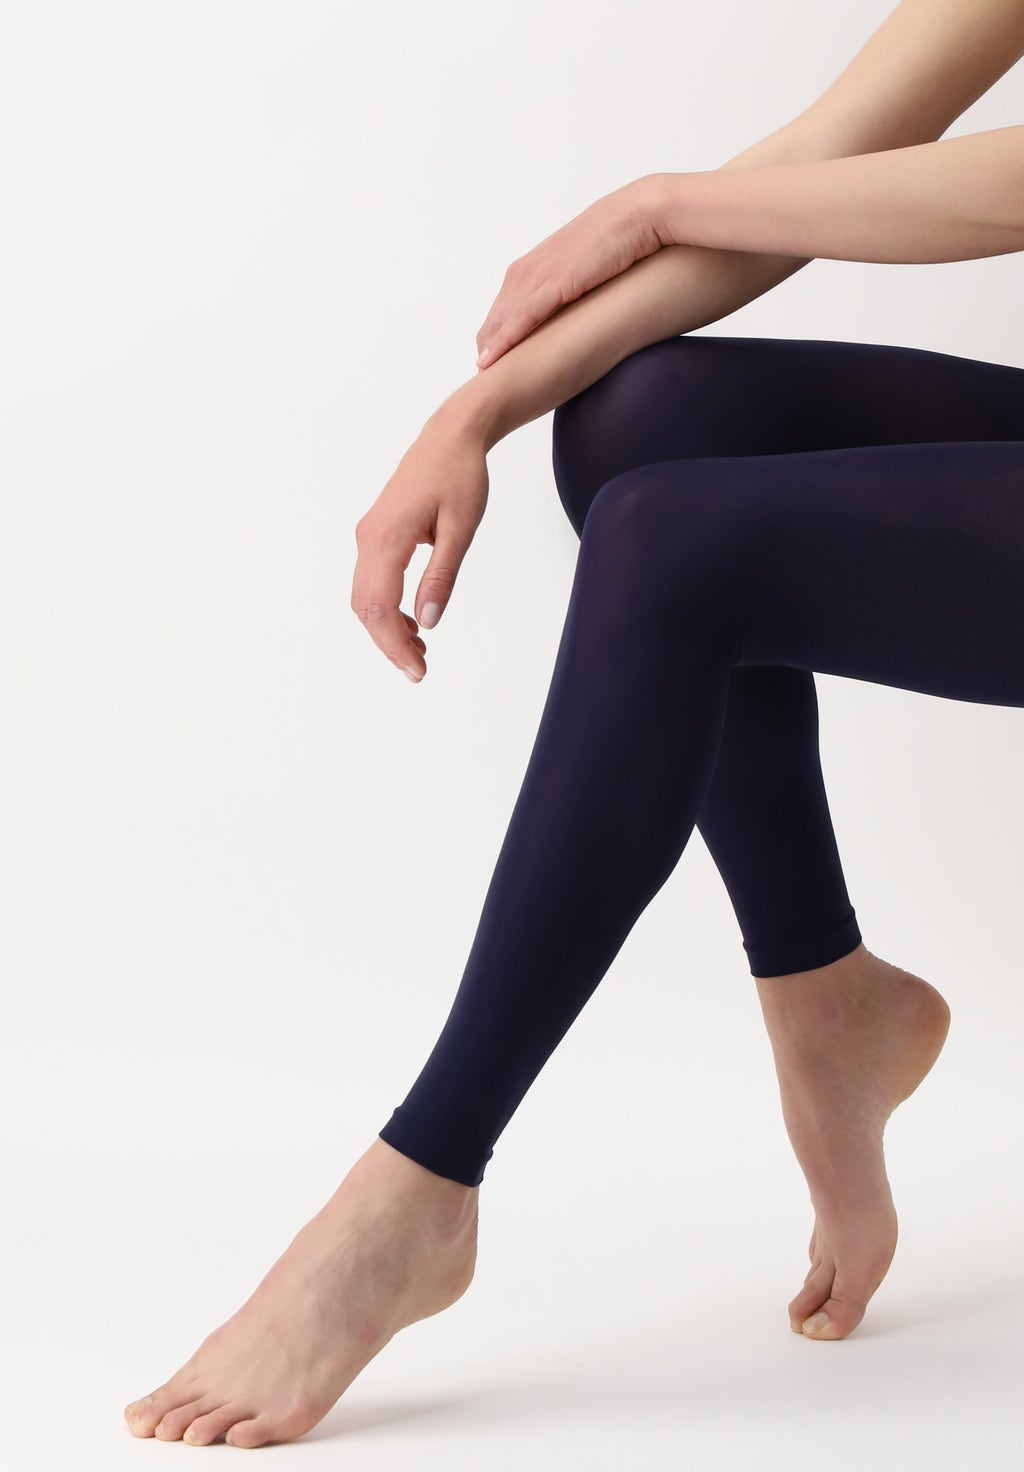 OroblÌ_ All Colors Leggings - Marine navy soft matte opaque footless tights with deep comfort waist band, flat seams and gusset.